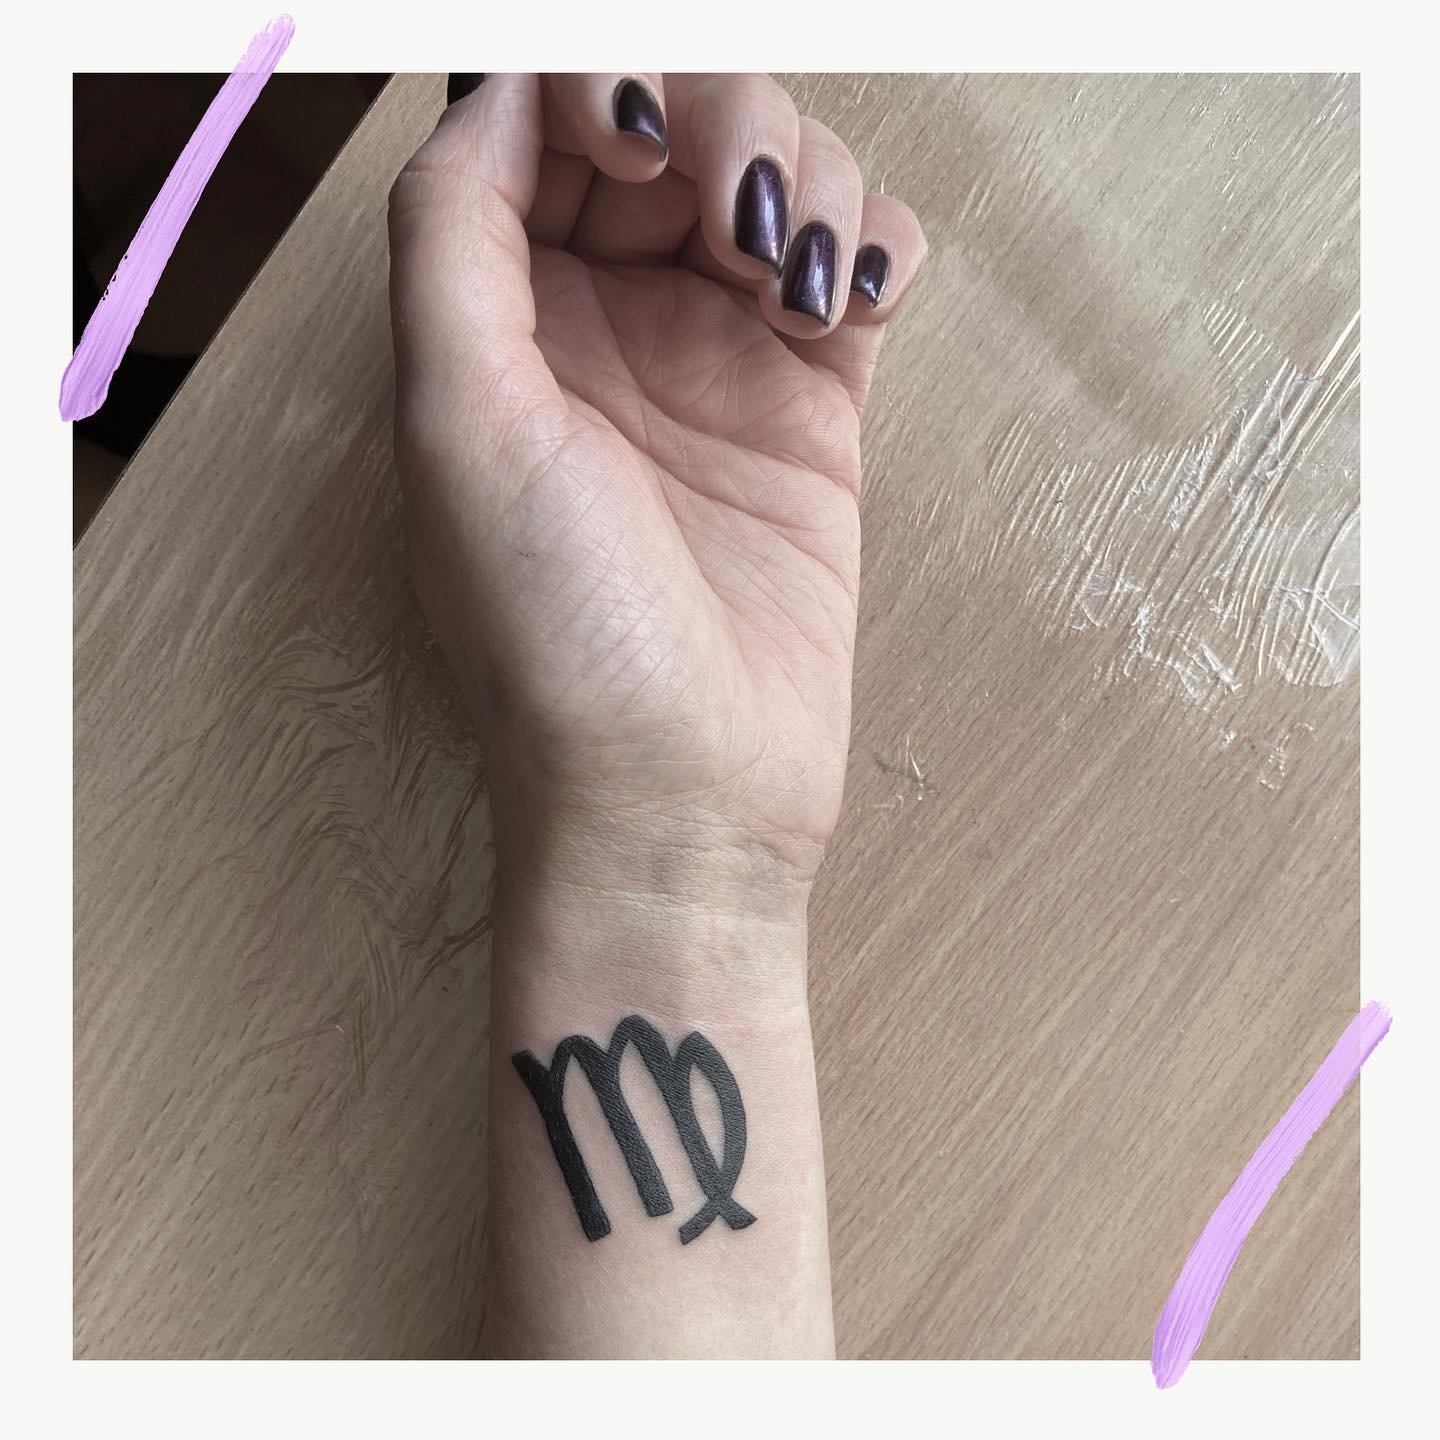 If you want to get a Virgo sign tattoo that looks simple but eye-catching at the same time, this design will satisfy your demands to the fullest.